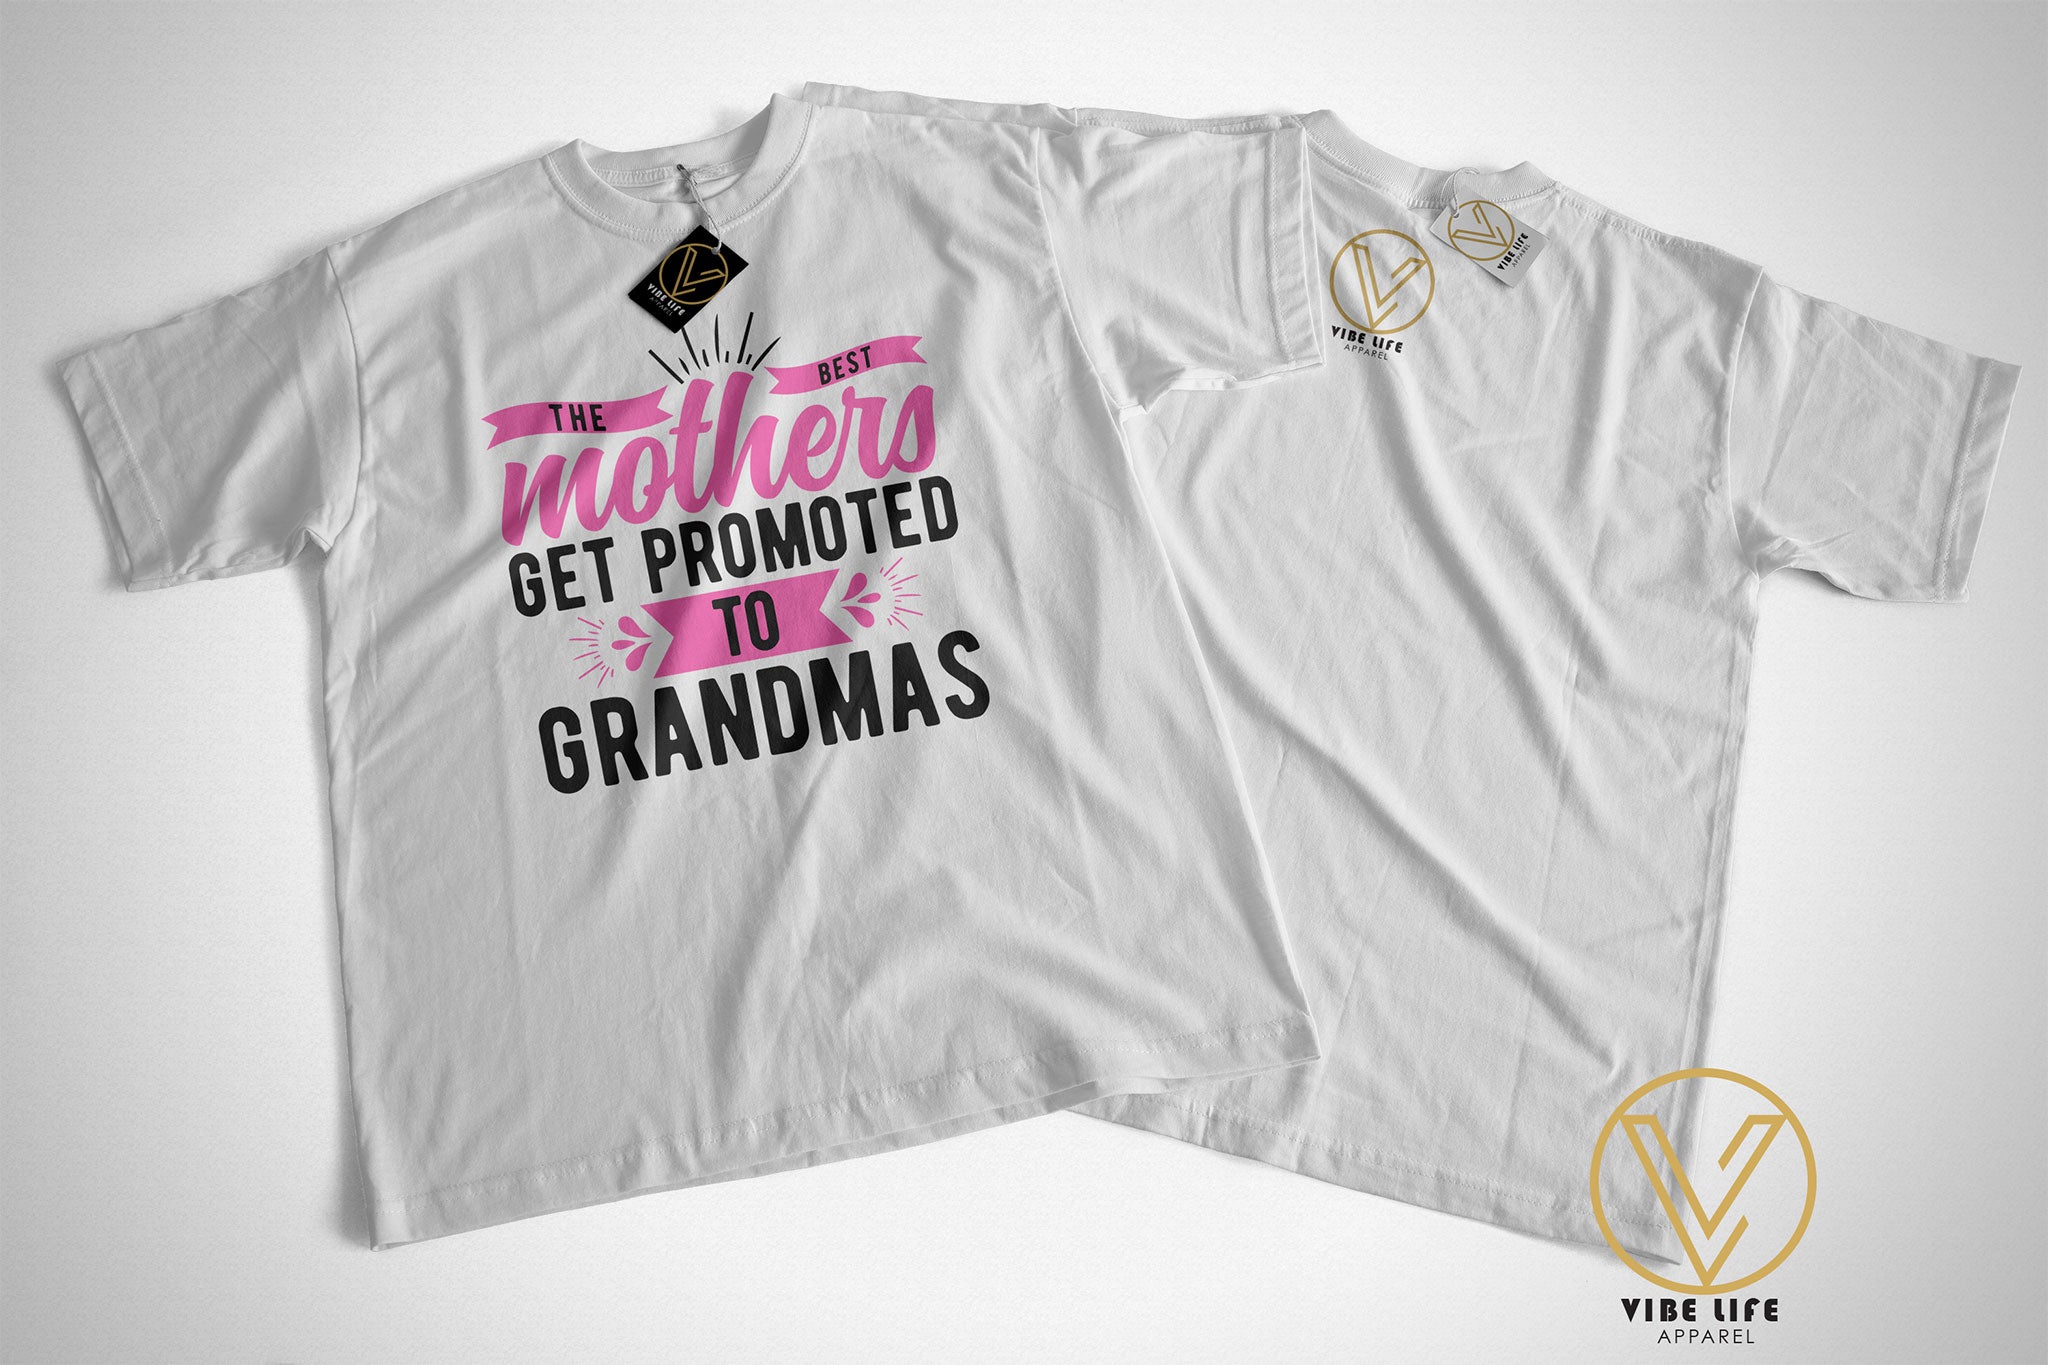 The Best Mothers Get Promoted to Grandmas